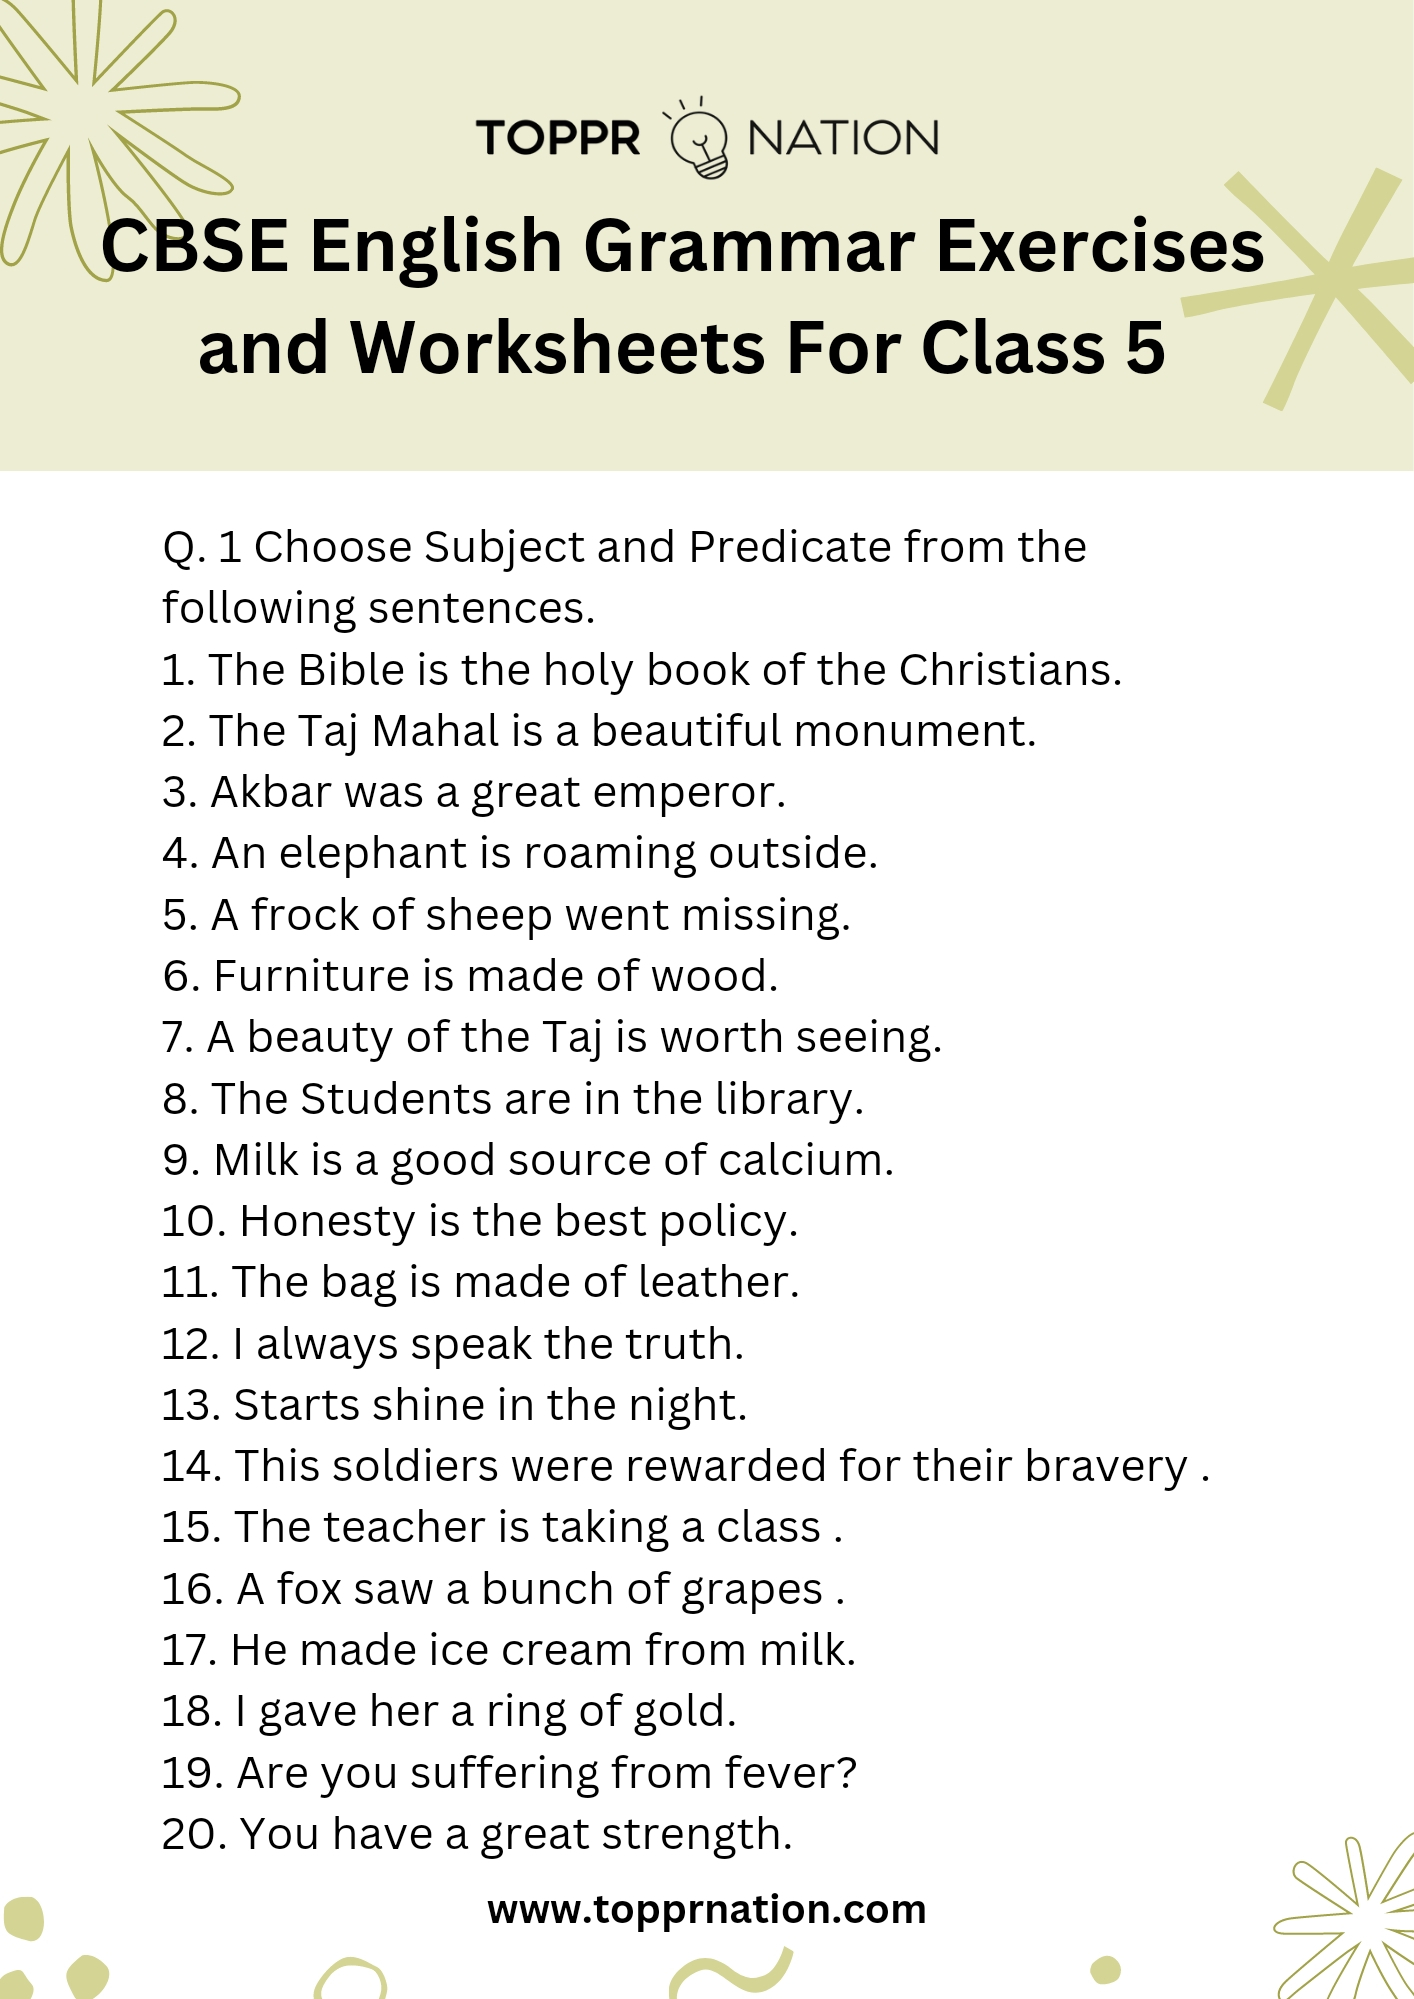 CBSE English Grammar Exercises And Worksheets For Class 5